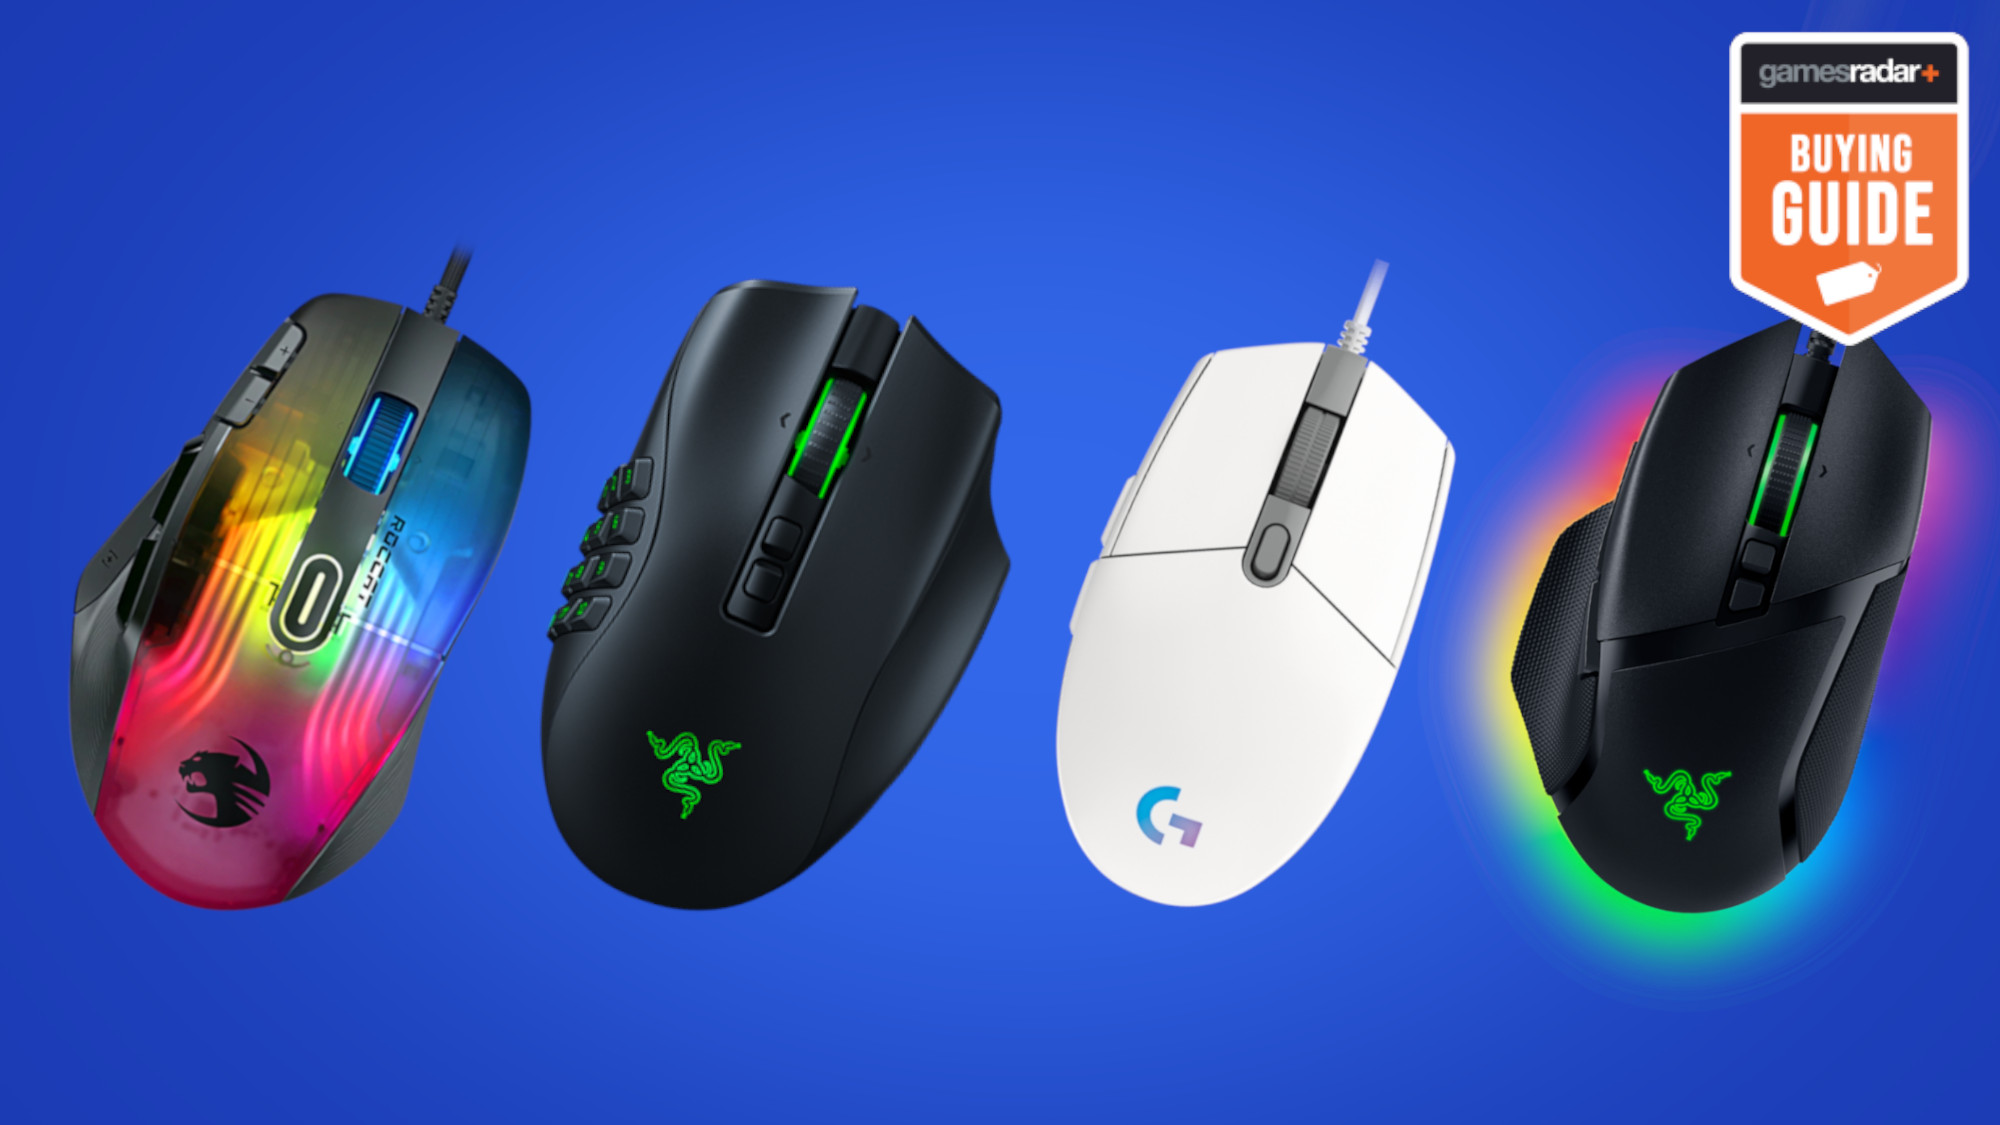 vold kaos gå i stå The best gaming mouse in 2023 - all the top pointers | GamesRadar+